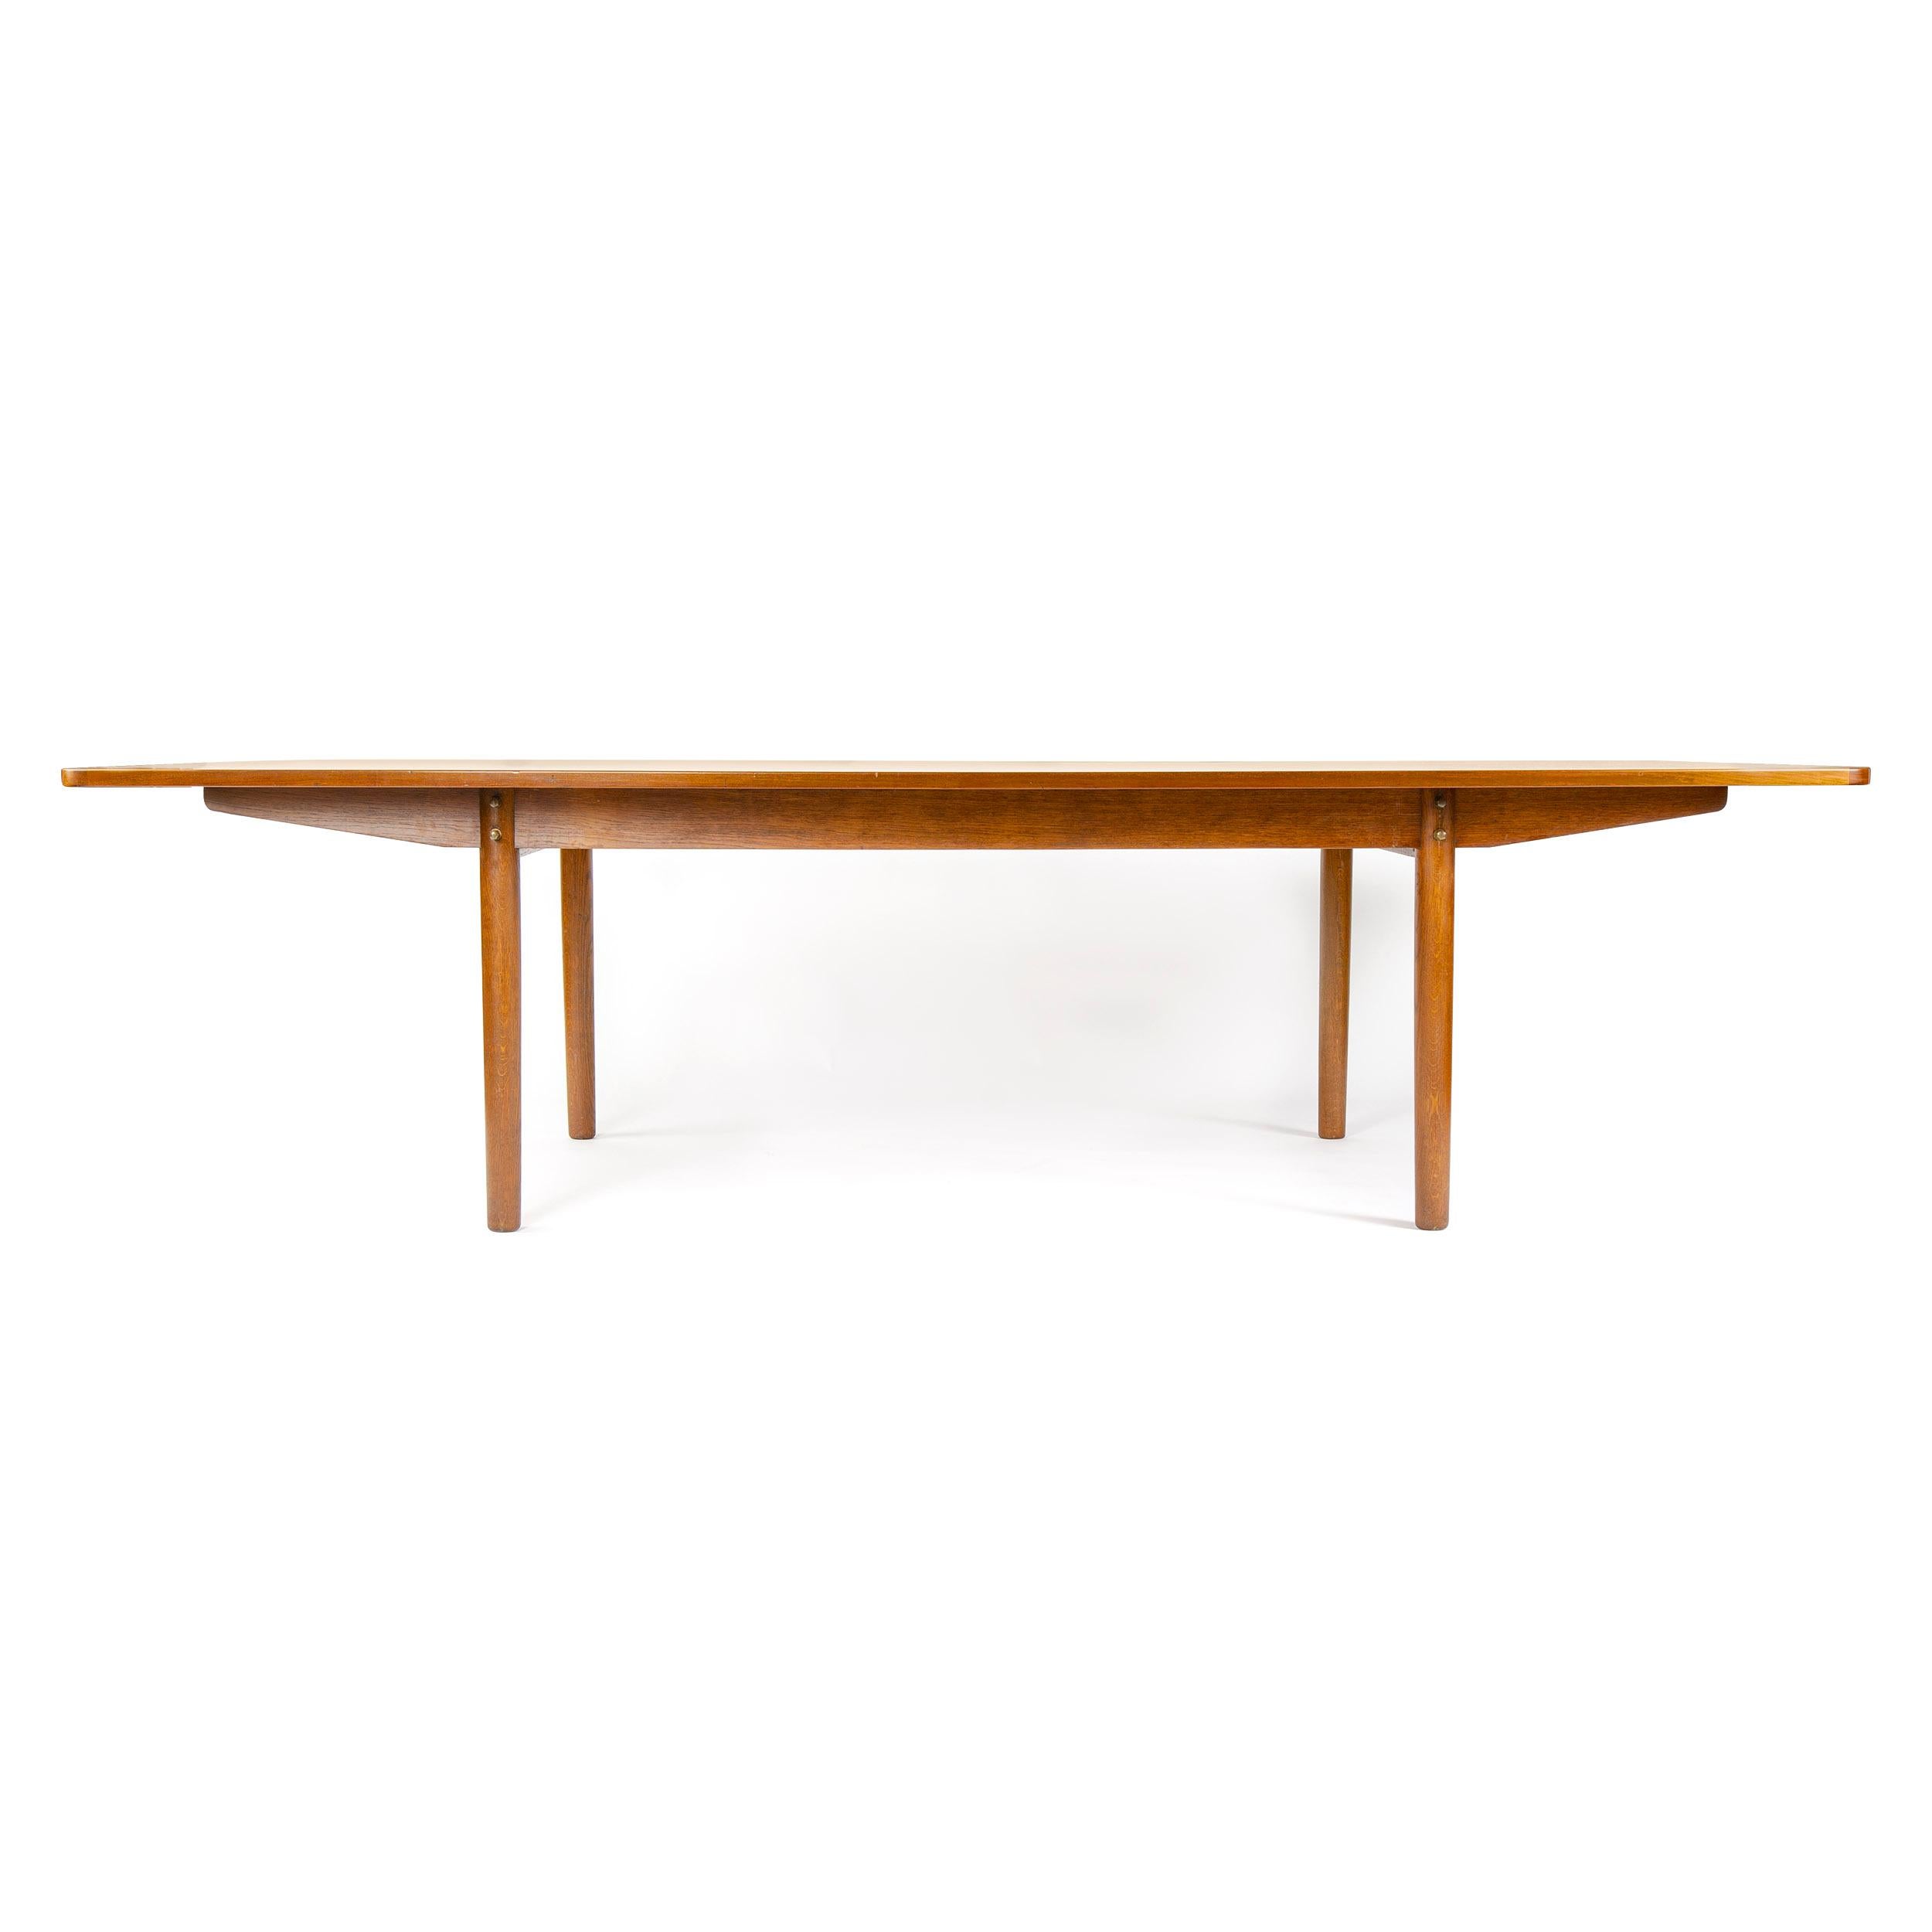 A large Scandinavian Modern dining table or conference with a bowed top crafted in solid teak wood on oak tapered dowel legs. 110.5